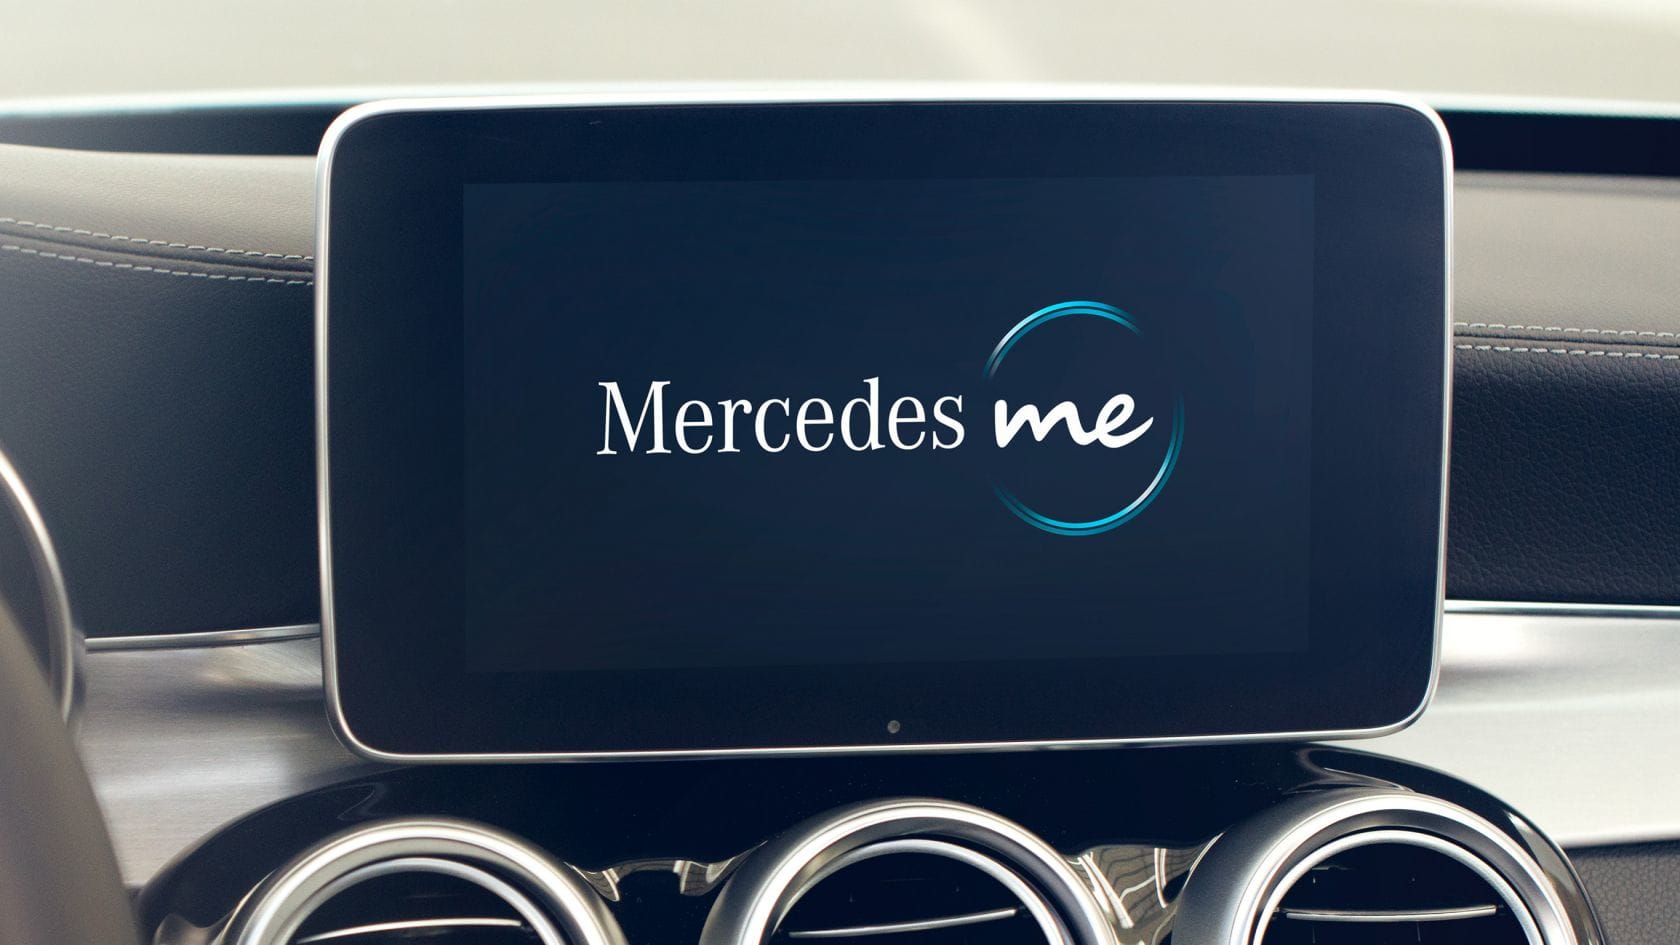 A security flaw in the Mercedes app would display other users' data